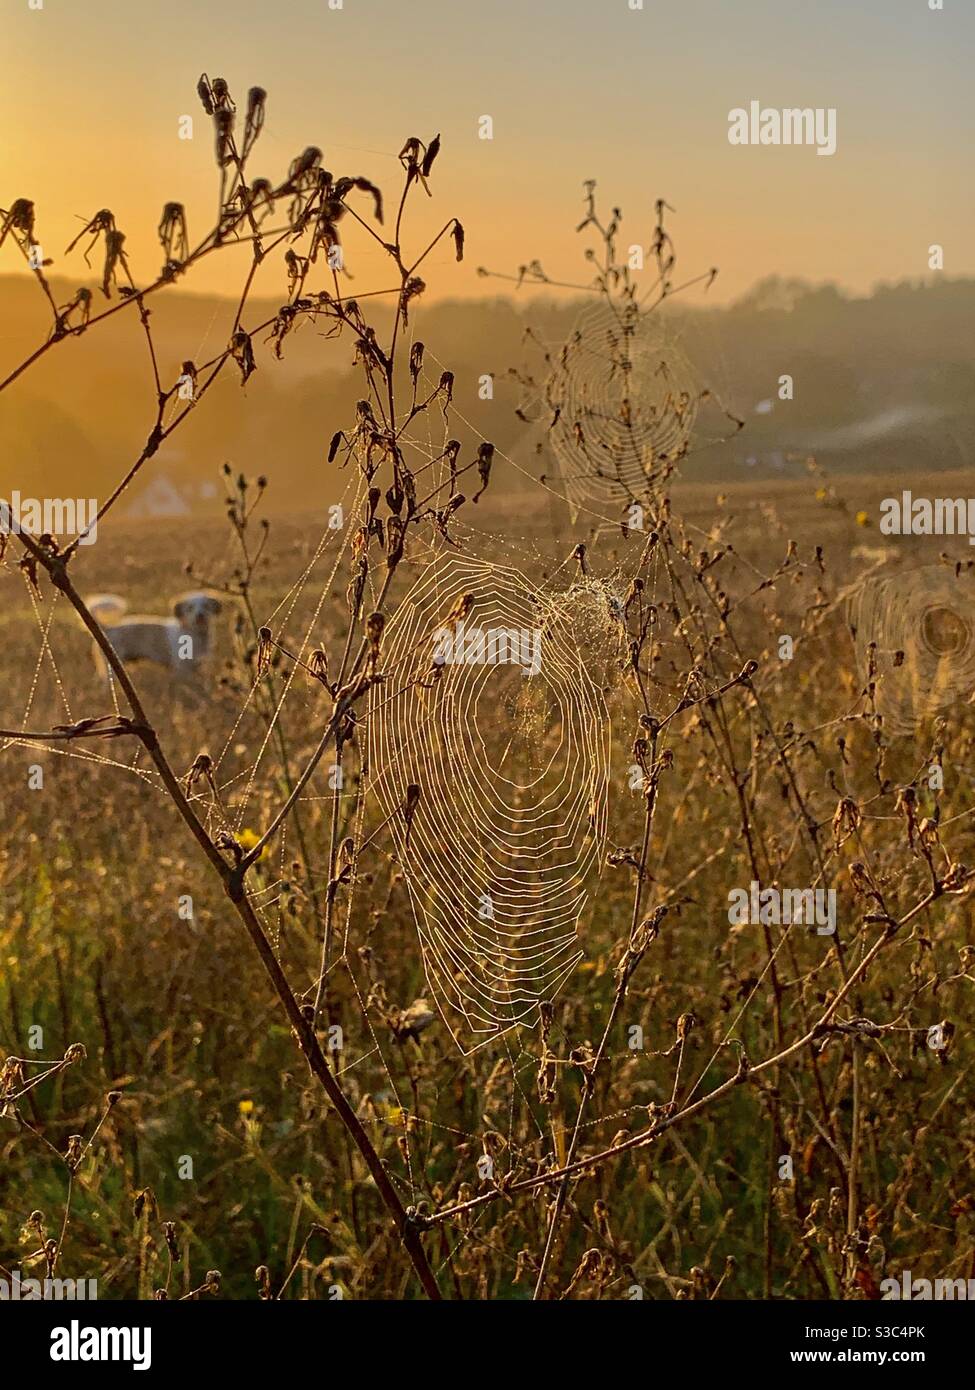 Pet Cavapoo dog on a walk in winter behind a dew laden delicate spider web spun between dried grasses in a countryside field bathed in golden light from the rising sun Stock Photo